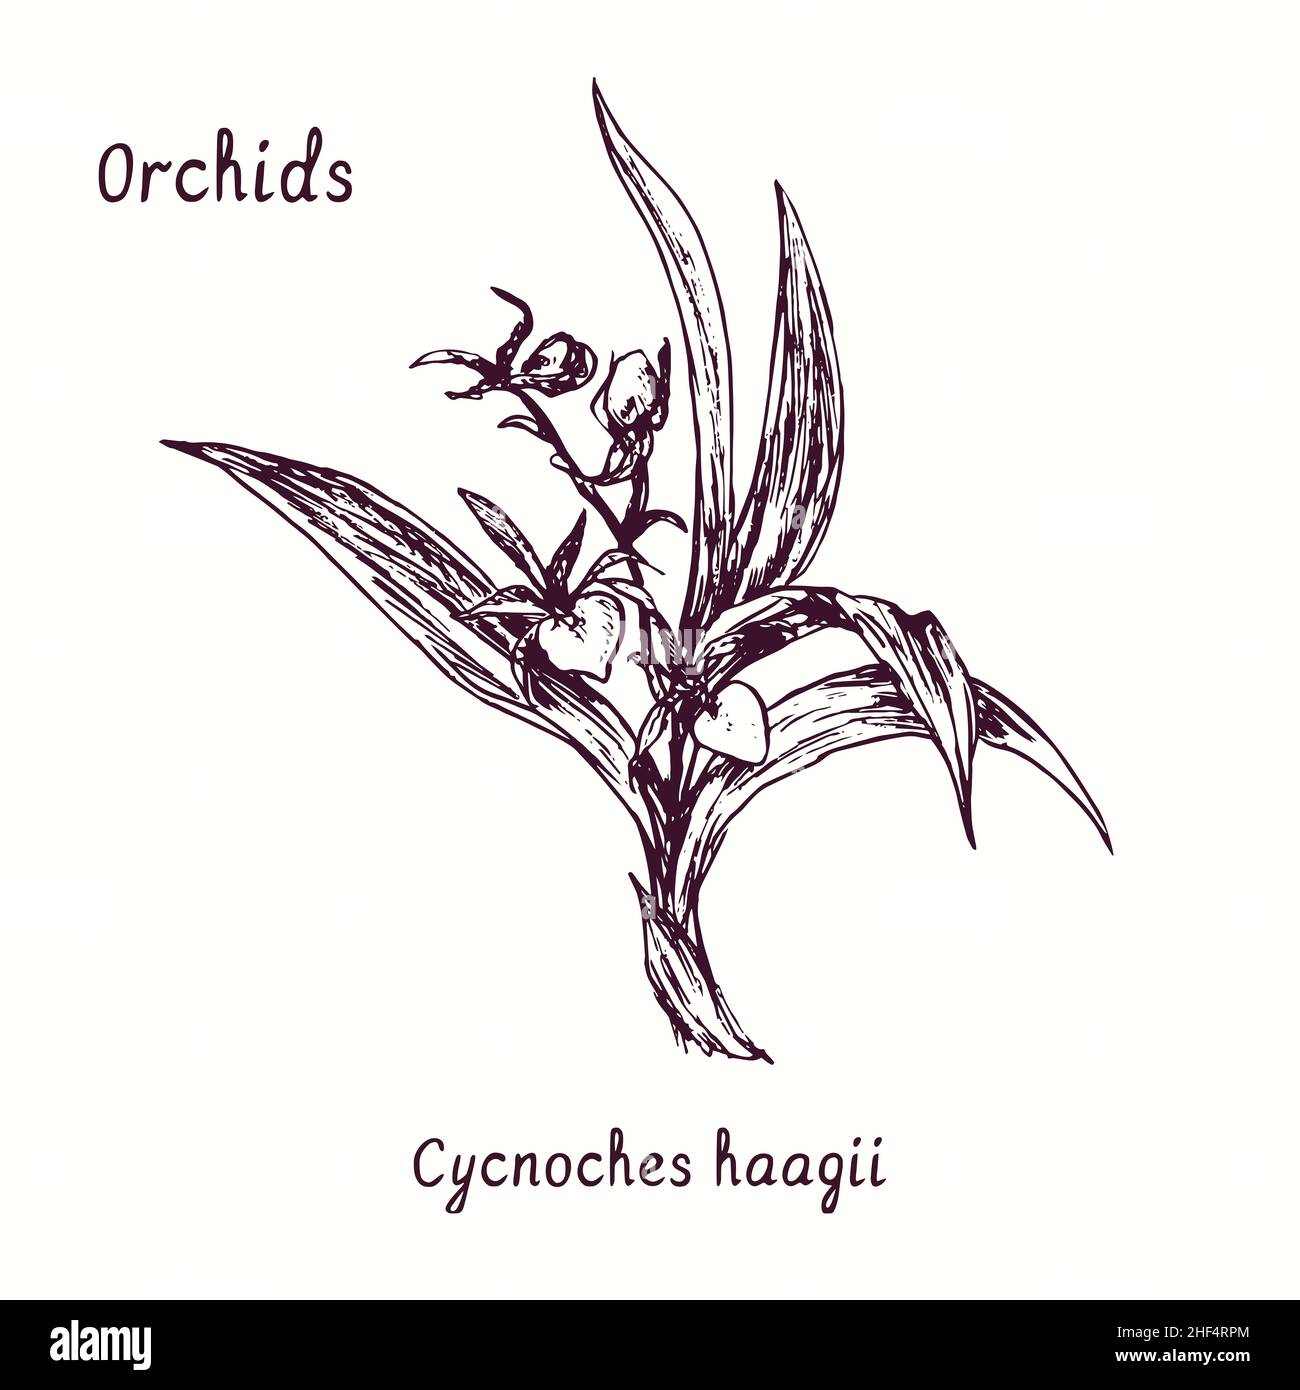 Cycnoches hagii orchids flower collection. Ink black and white doodle drawing in woodcut style with inscription. Stock Photo